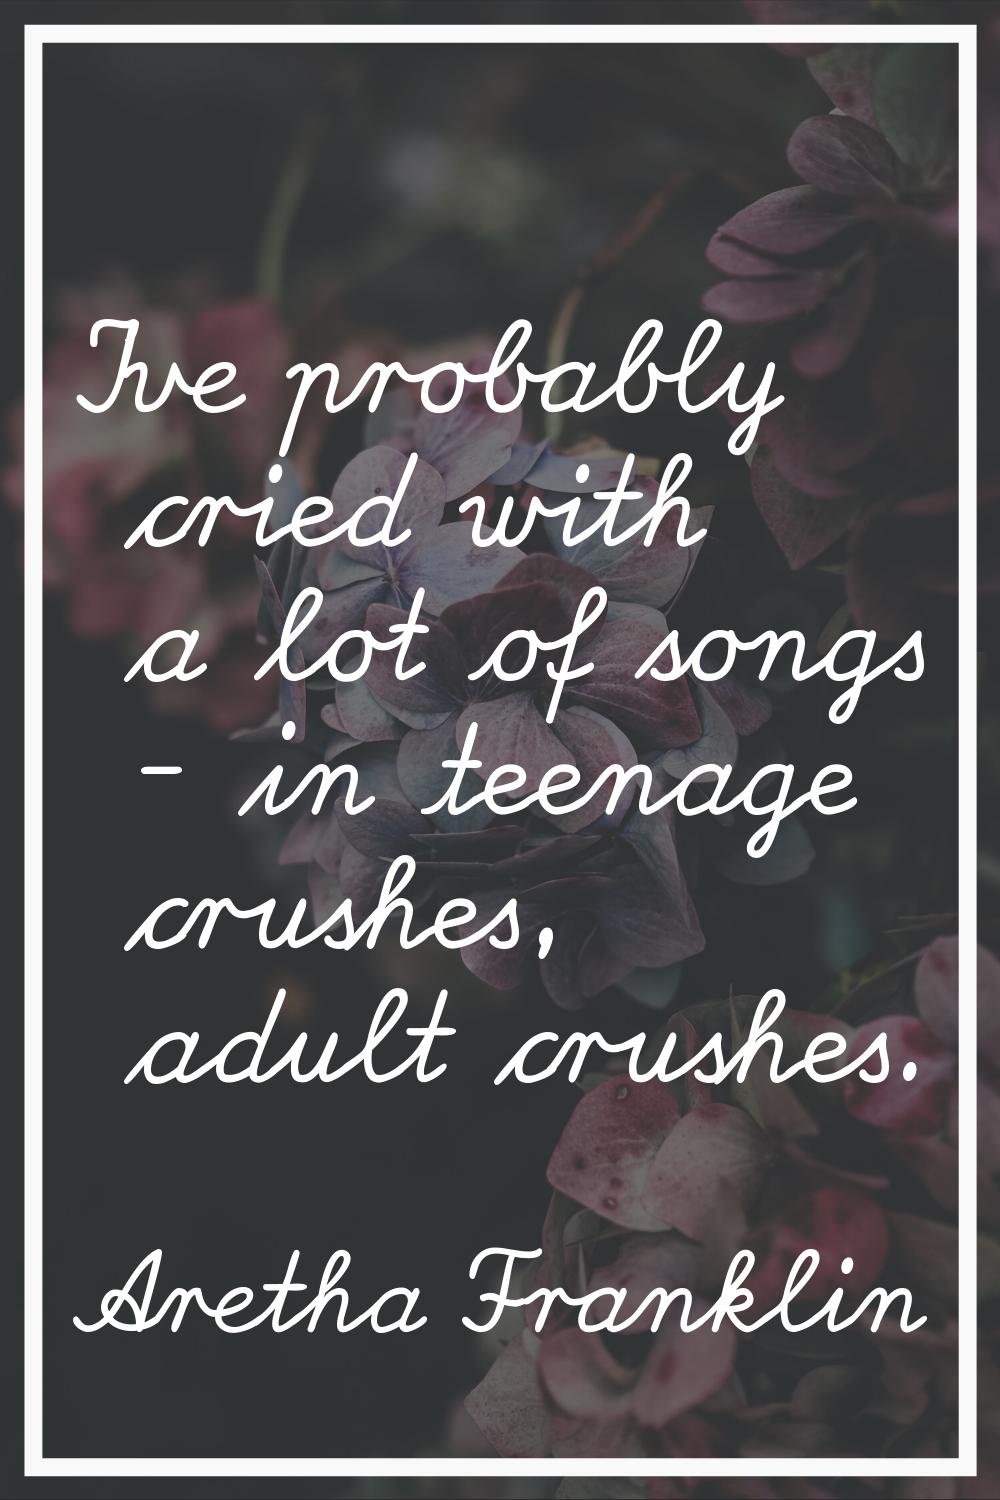 I've probably cried with a lot of songs - in teenage crushes, adult crushes.